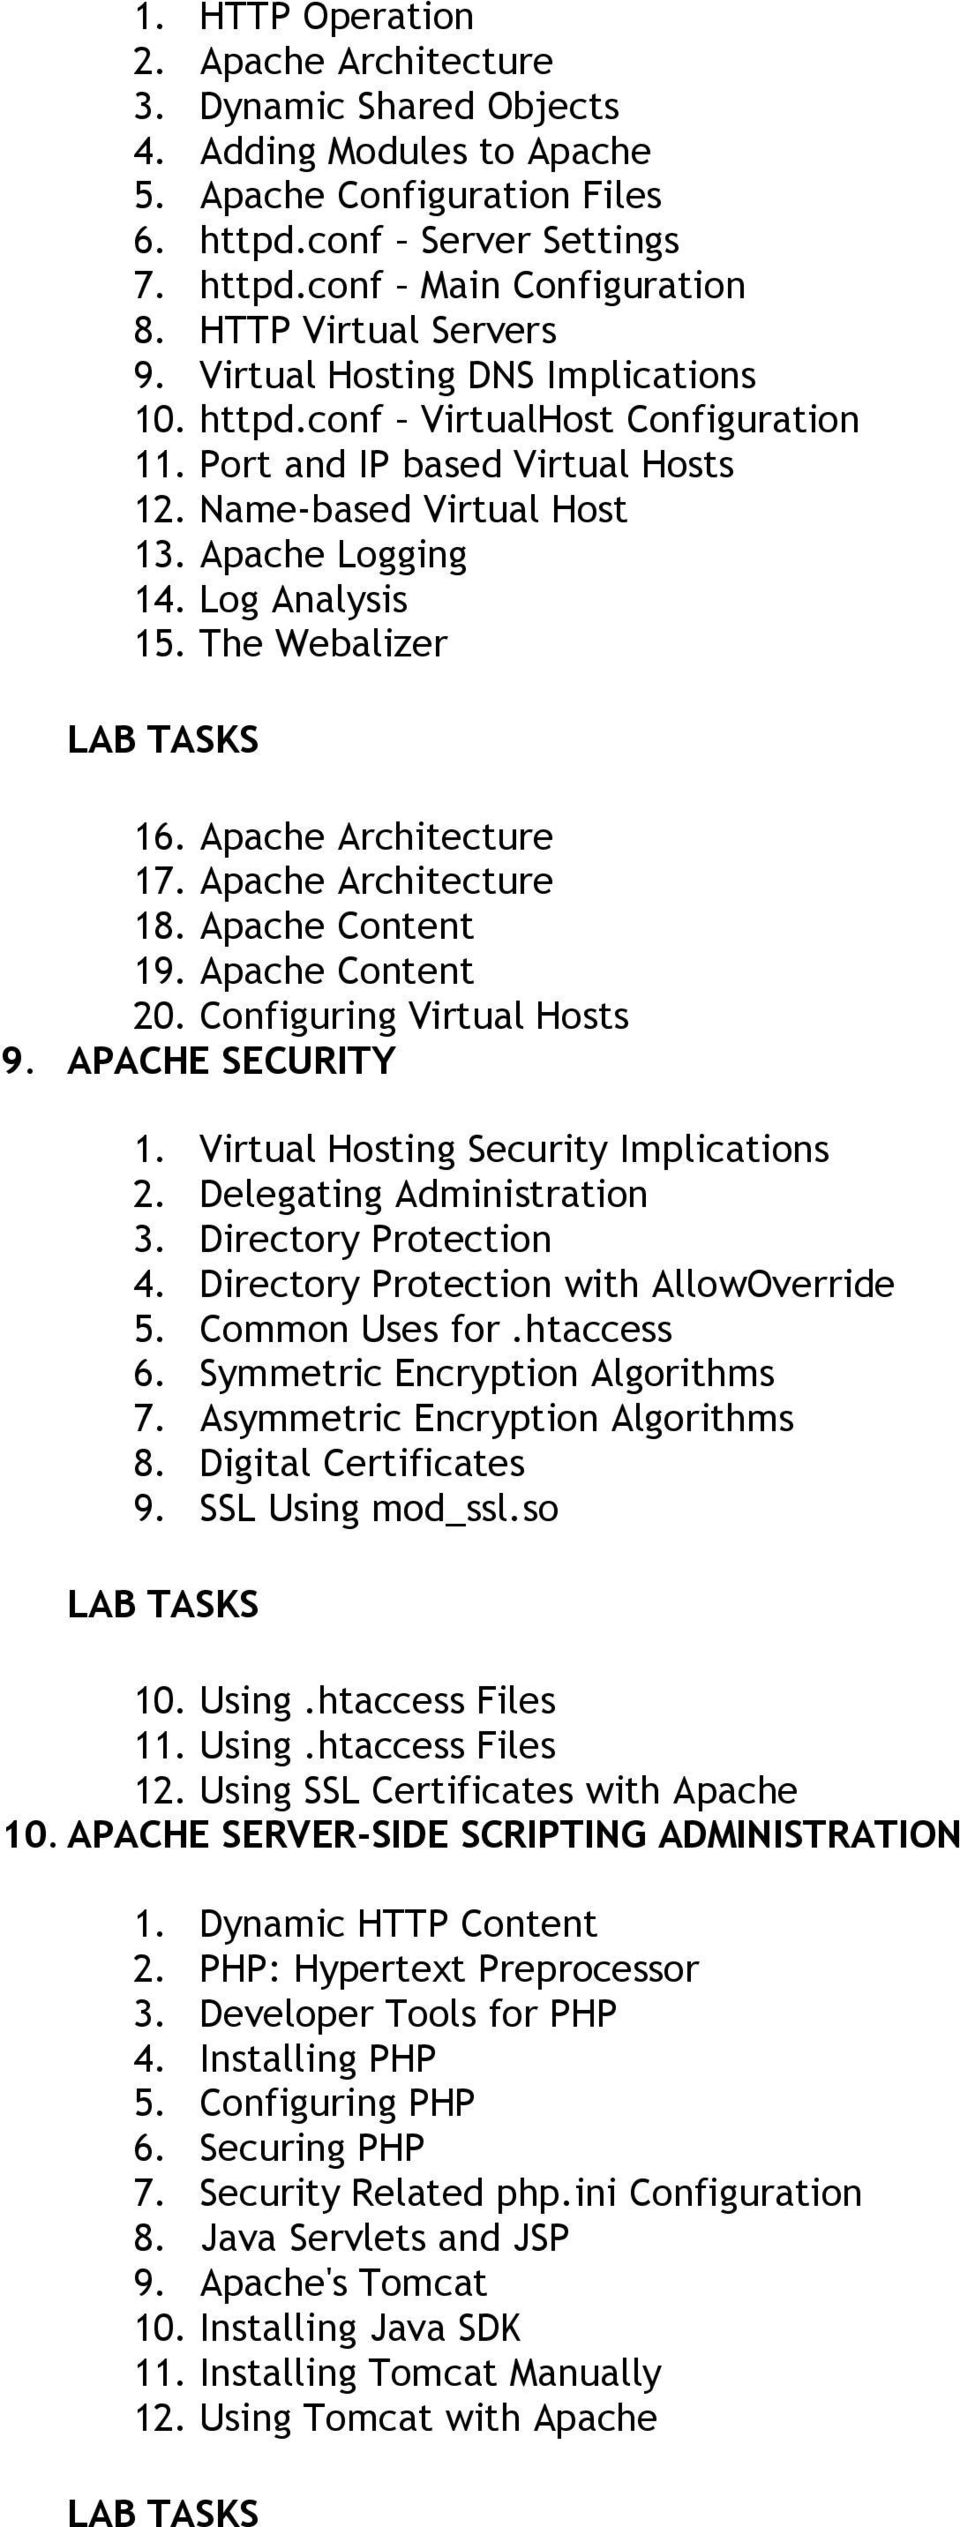 Log Analysis 15. The Webalizer 16. Apache Architecture 17. Apache Architecture 18. Apache Content 19. Apache Content 20. Configuring Virtual Hosts 9. APACHE SECURITY 1.